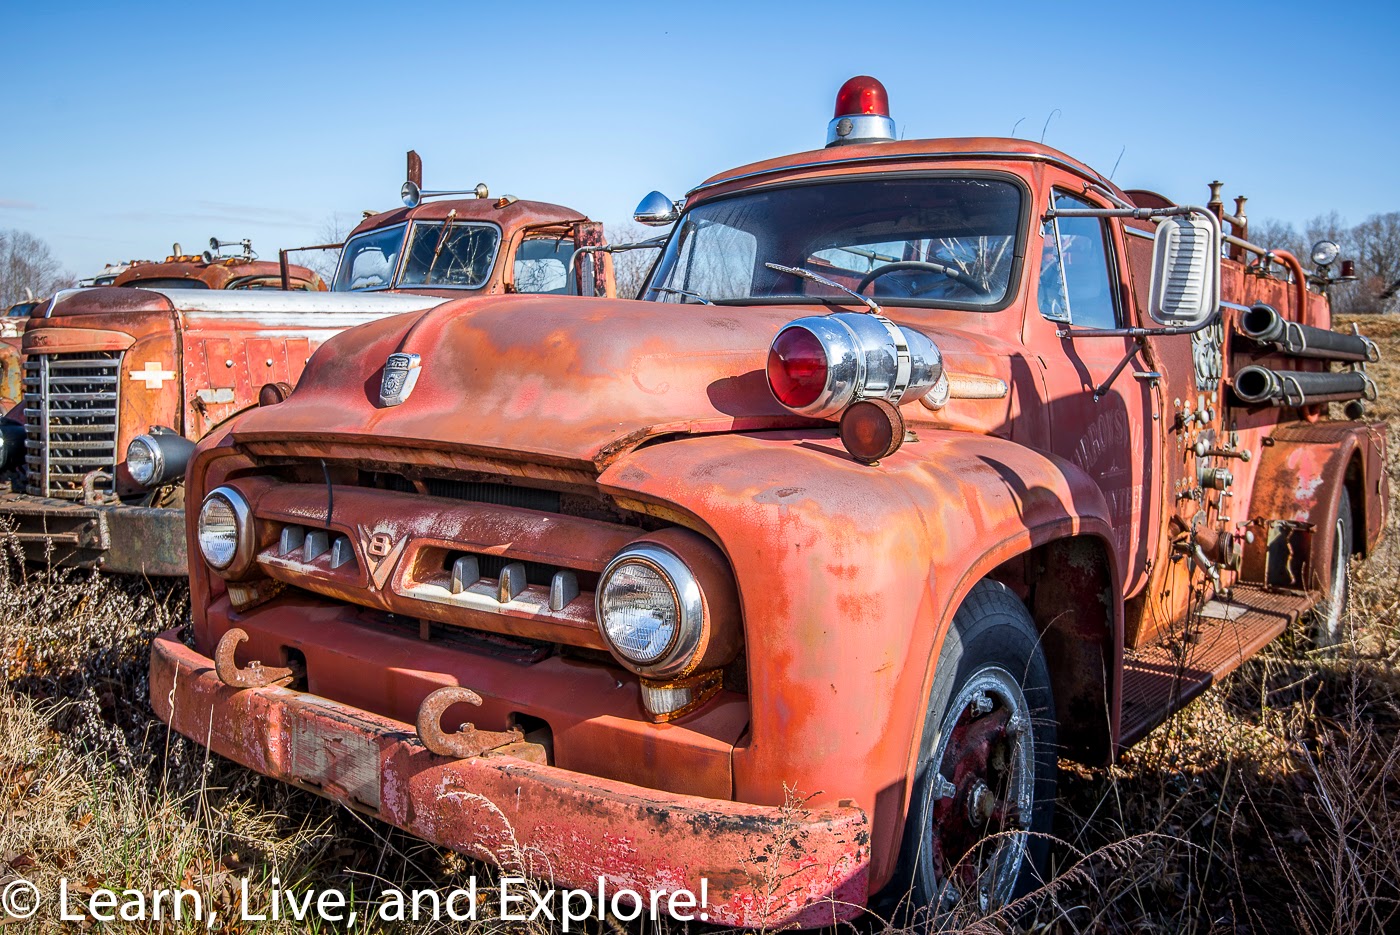 A Truck Graveyard in Columbia, VA ~ Learn, Live, and Explore!